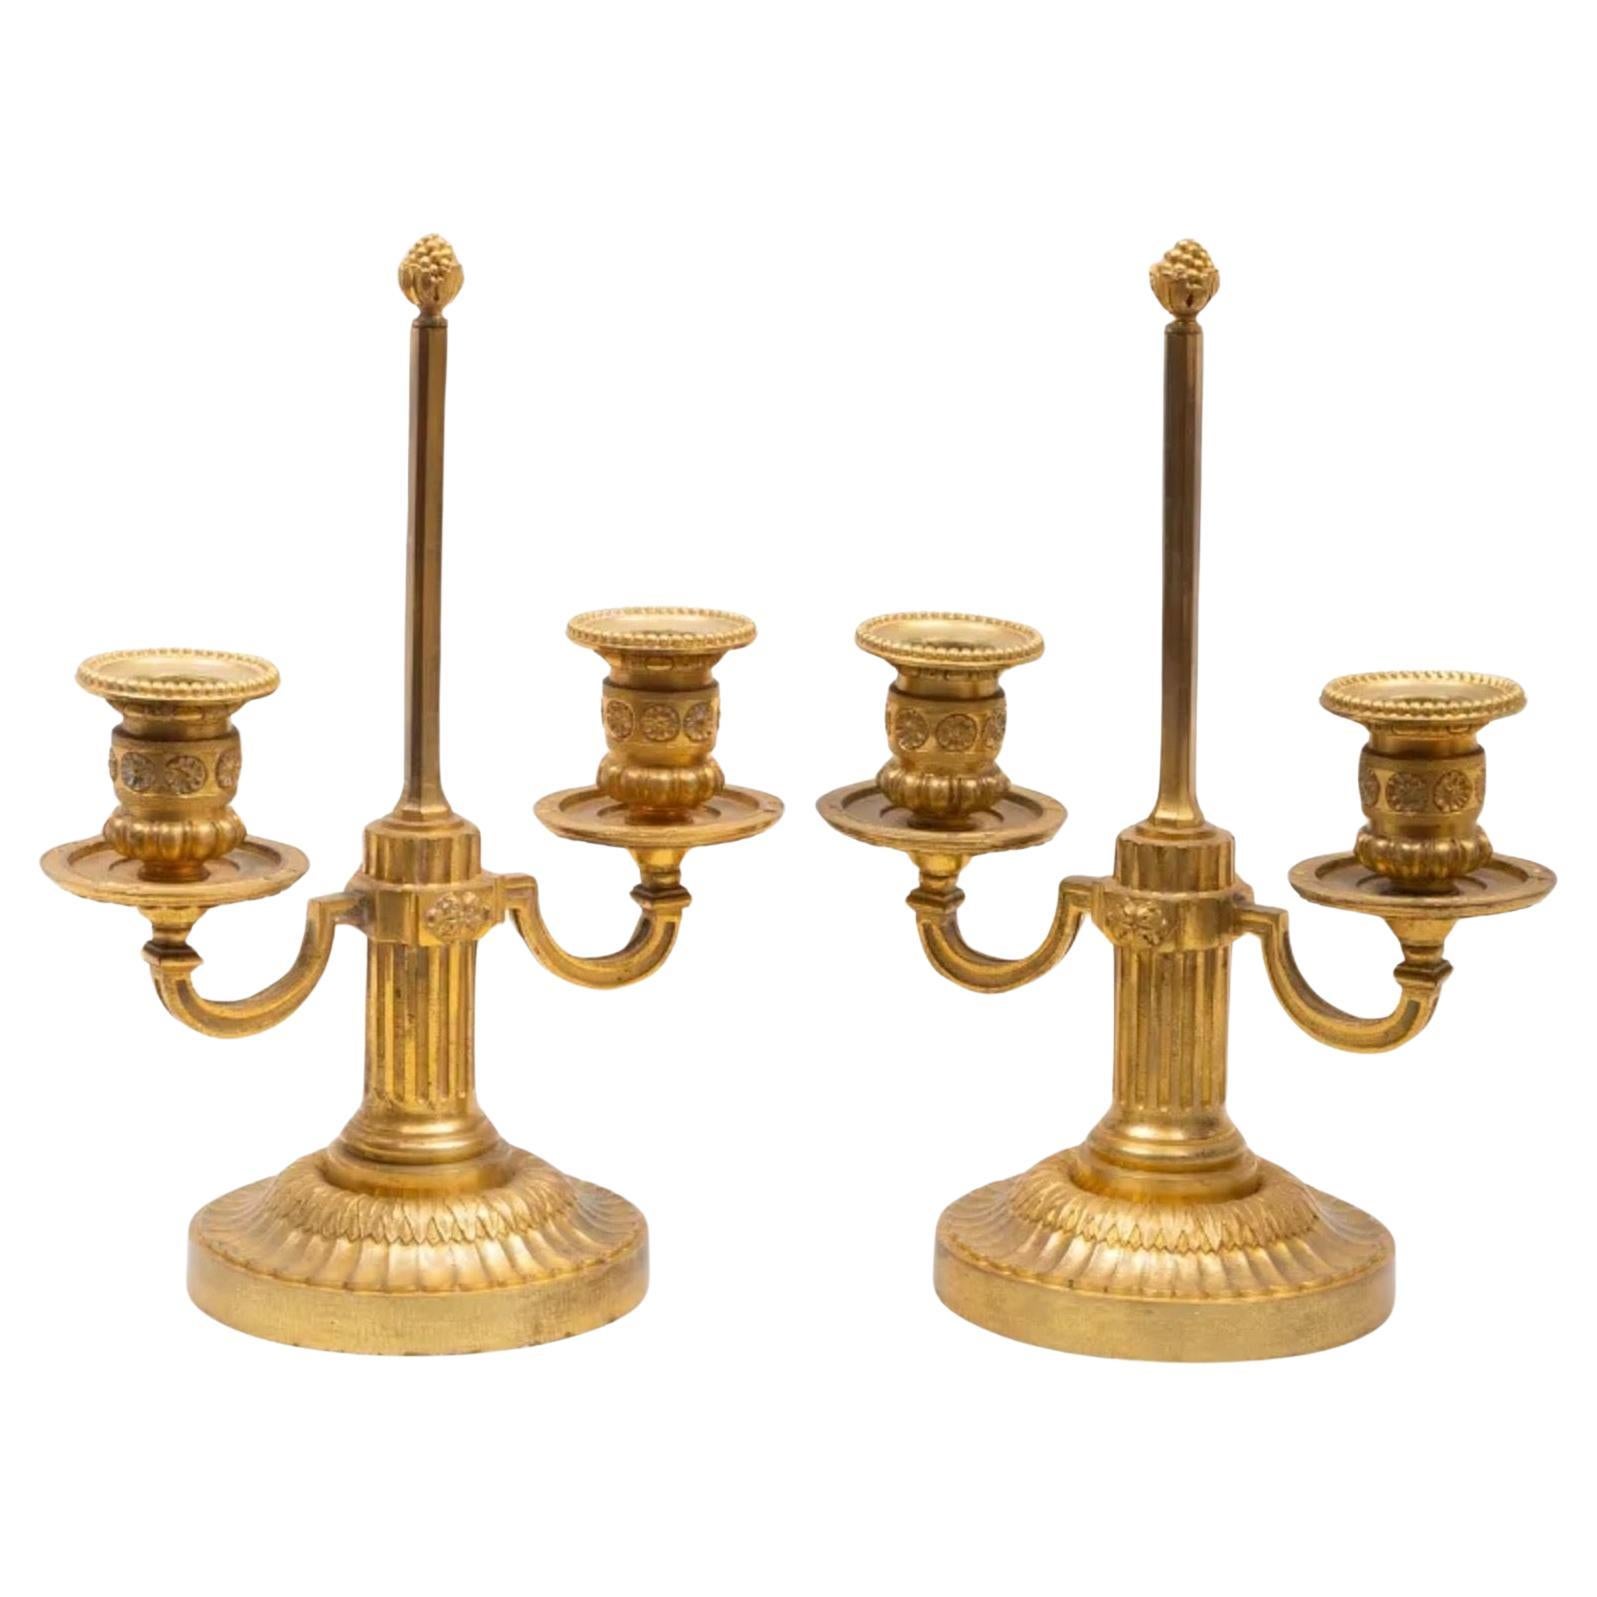 A Pair of Louis XVI Style Two-Light Ormolu Candlesticks For Sale